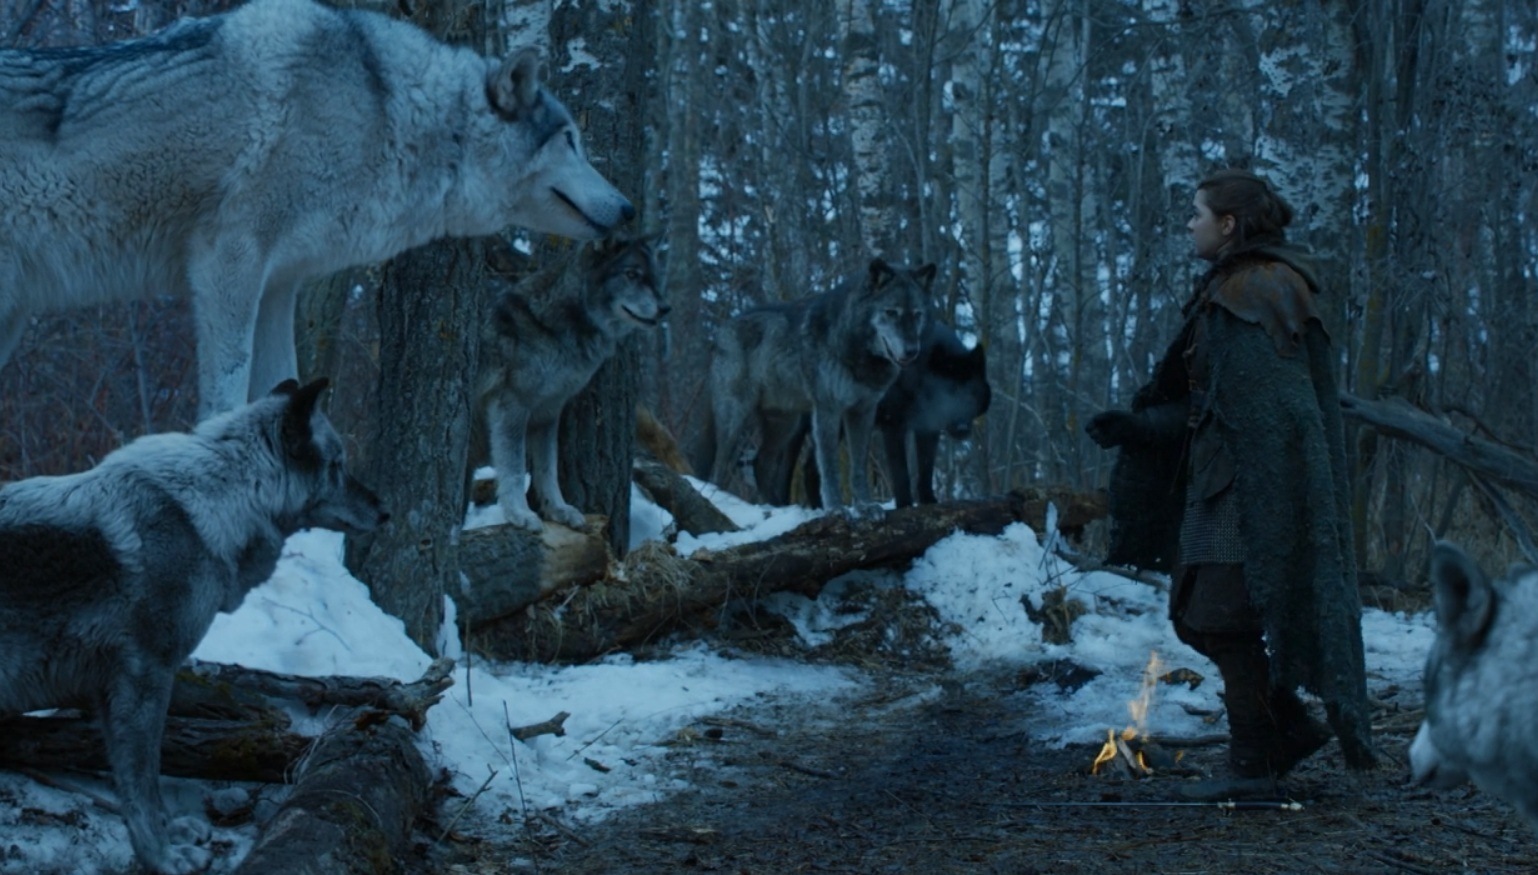 The influence of the ecological situation in Westeros and Essos on their inhabitants - Direwolf, Nymeria, Arya stark, Game of Thrones Season 7, Game of Thrones